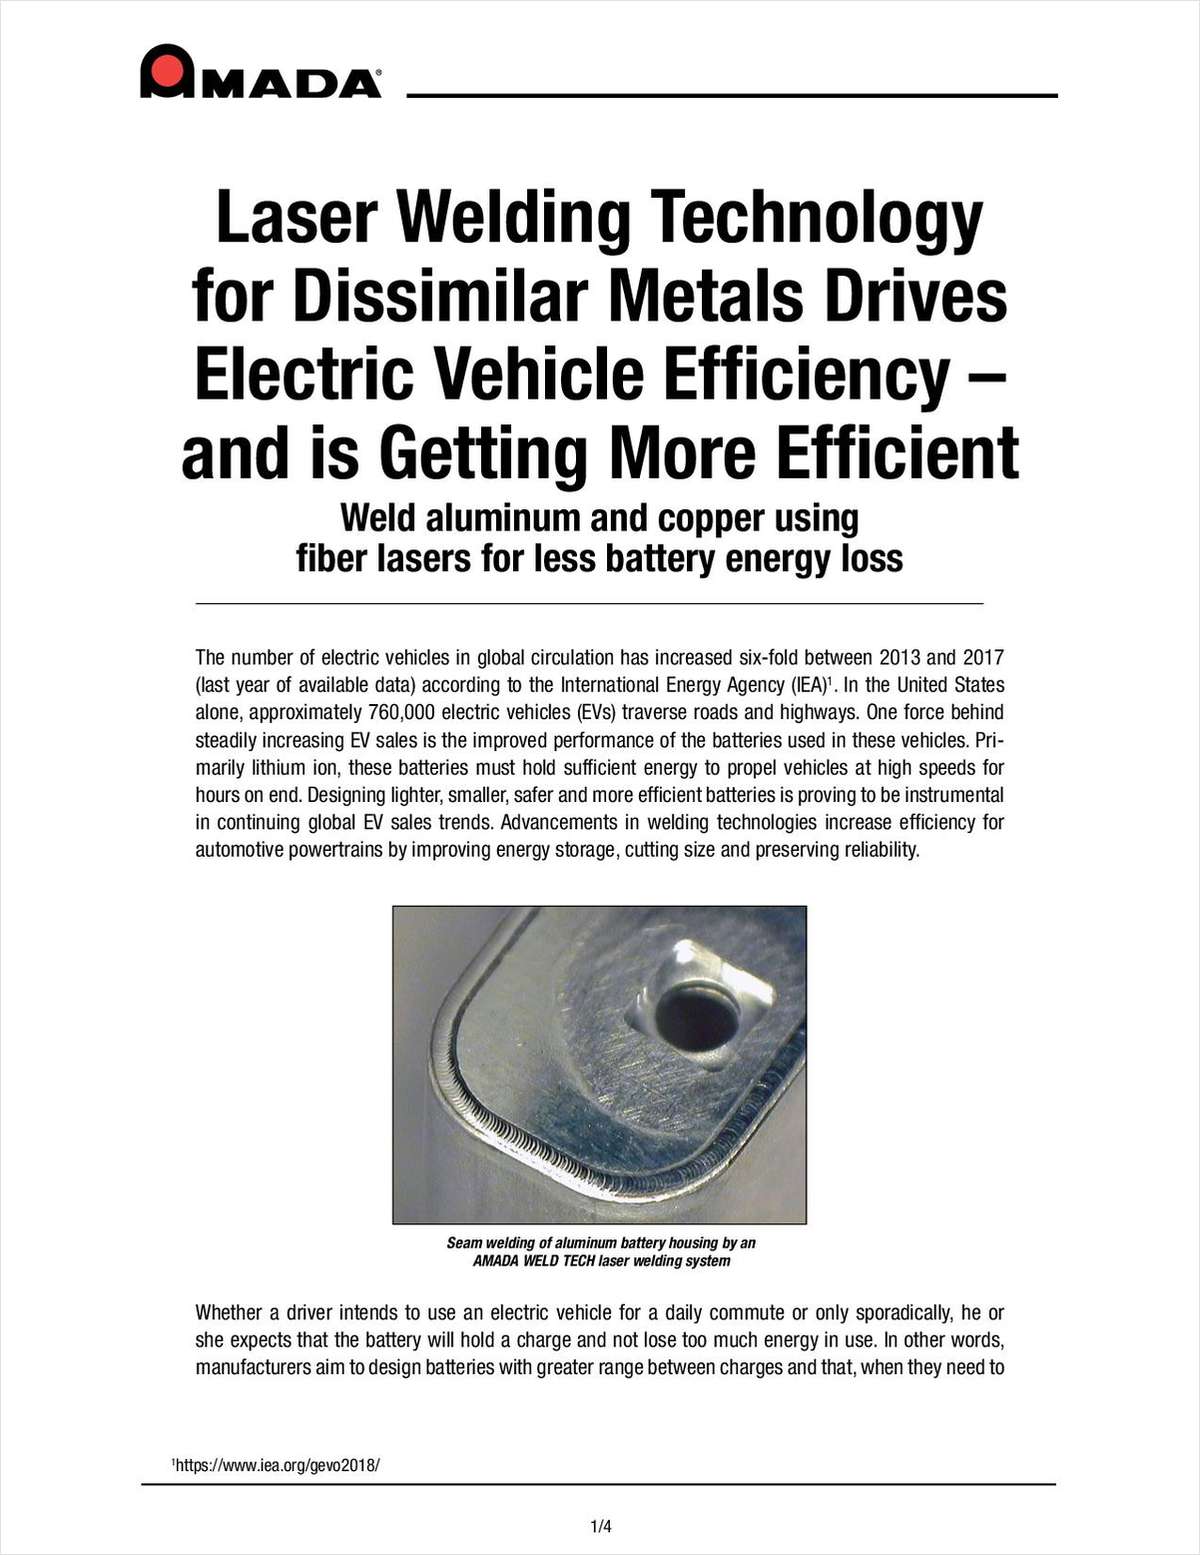 Laser Welding Technology for Dissimilar Metals Drives EV Efficiency - and is Getting More Efficient